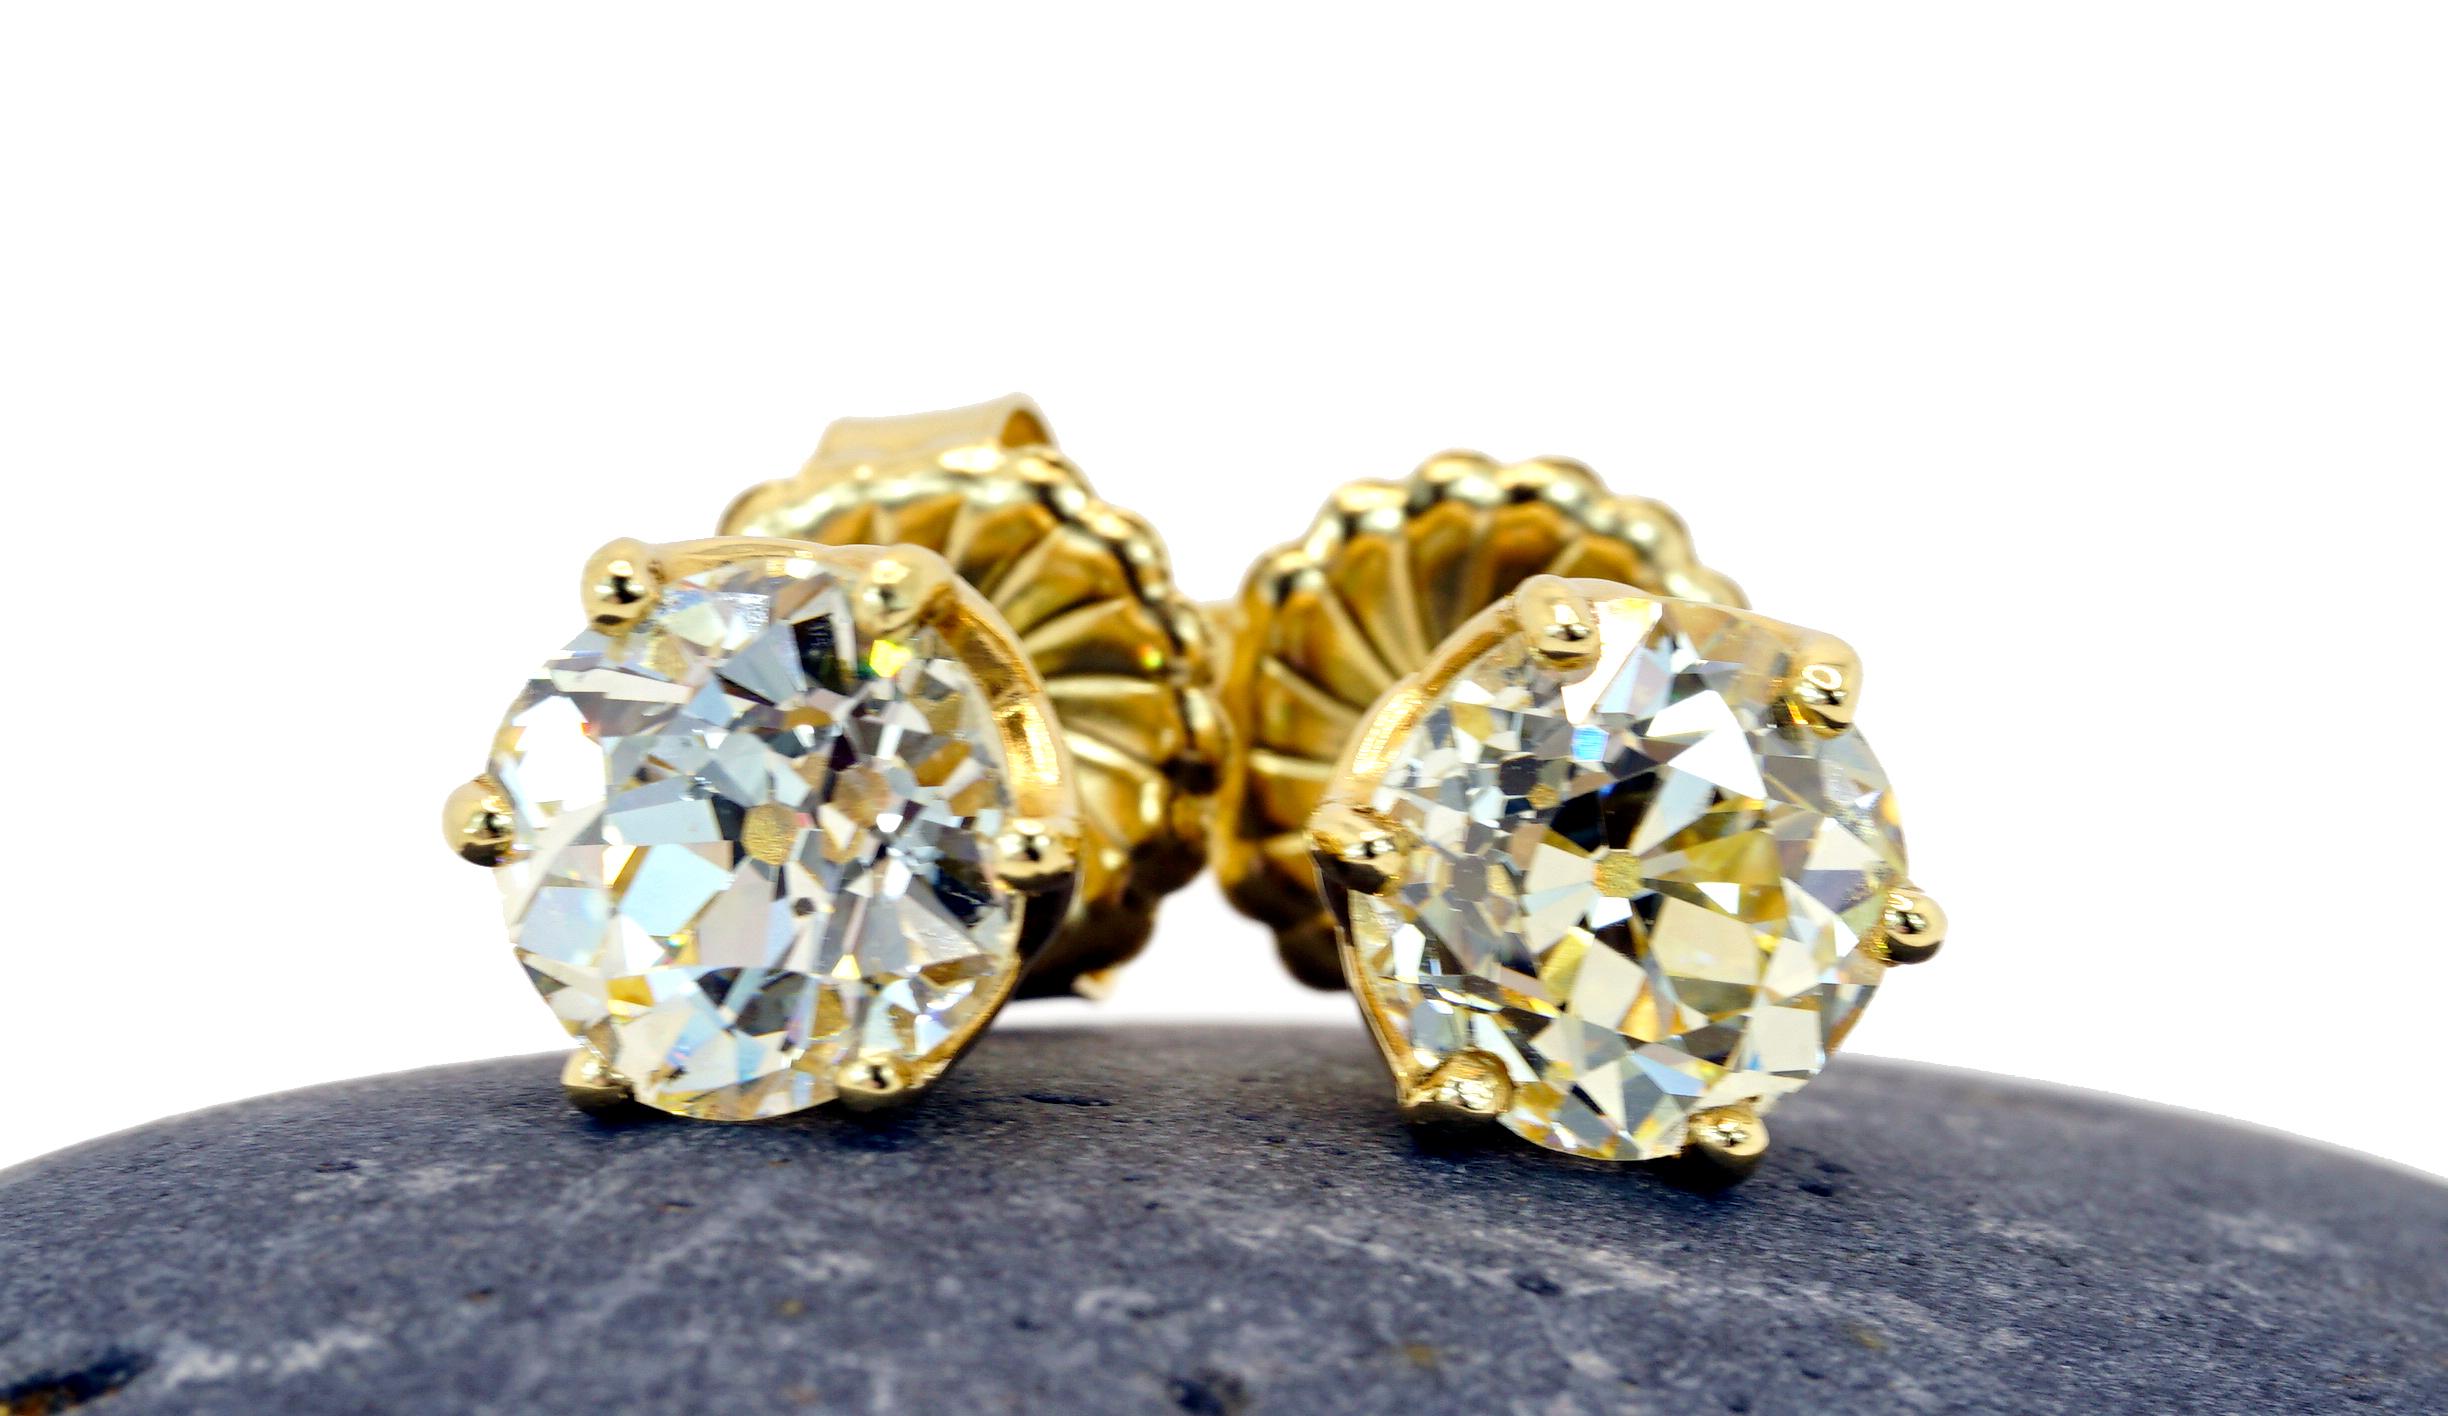 Two rare and natural Old European cut diamond stud earrings, weighing 4.95 Carats total , L-M in color SI1-SI2 in clarity. The old euro diamonds are set in a classic 14k yellow gold heavy six prongs with a filigree gallery and extra large backs.